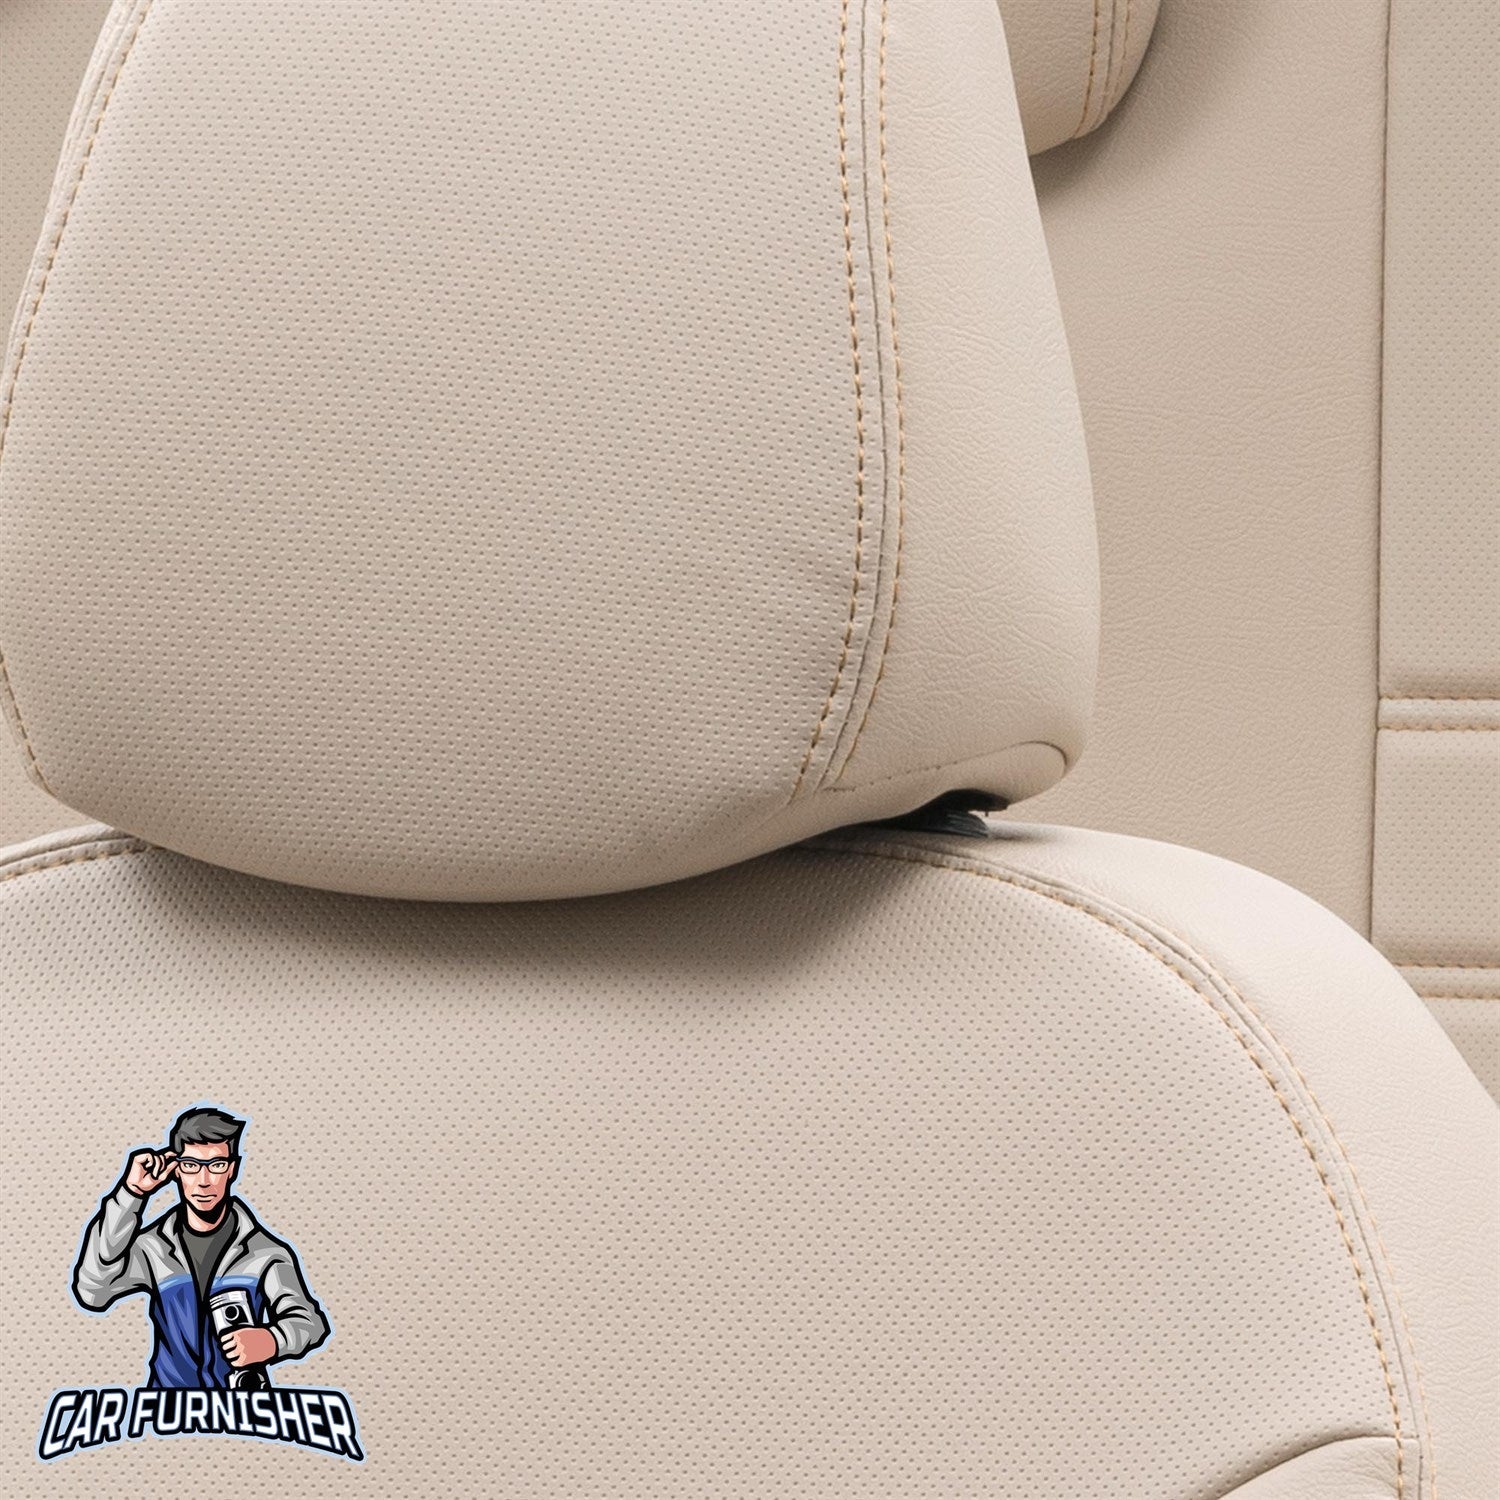 Toyota Hilux Seat Cover Istanbul Leather Design Beige Leather